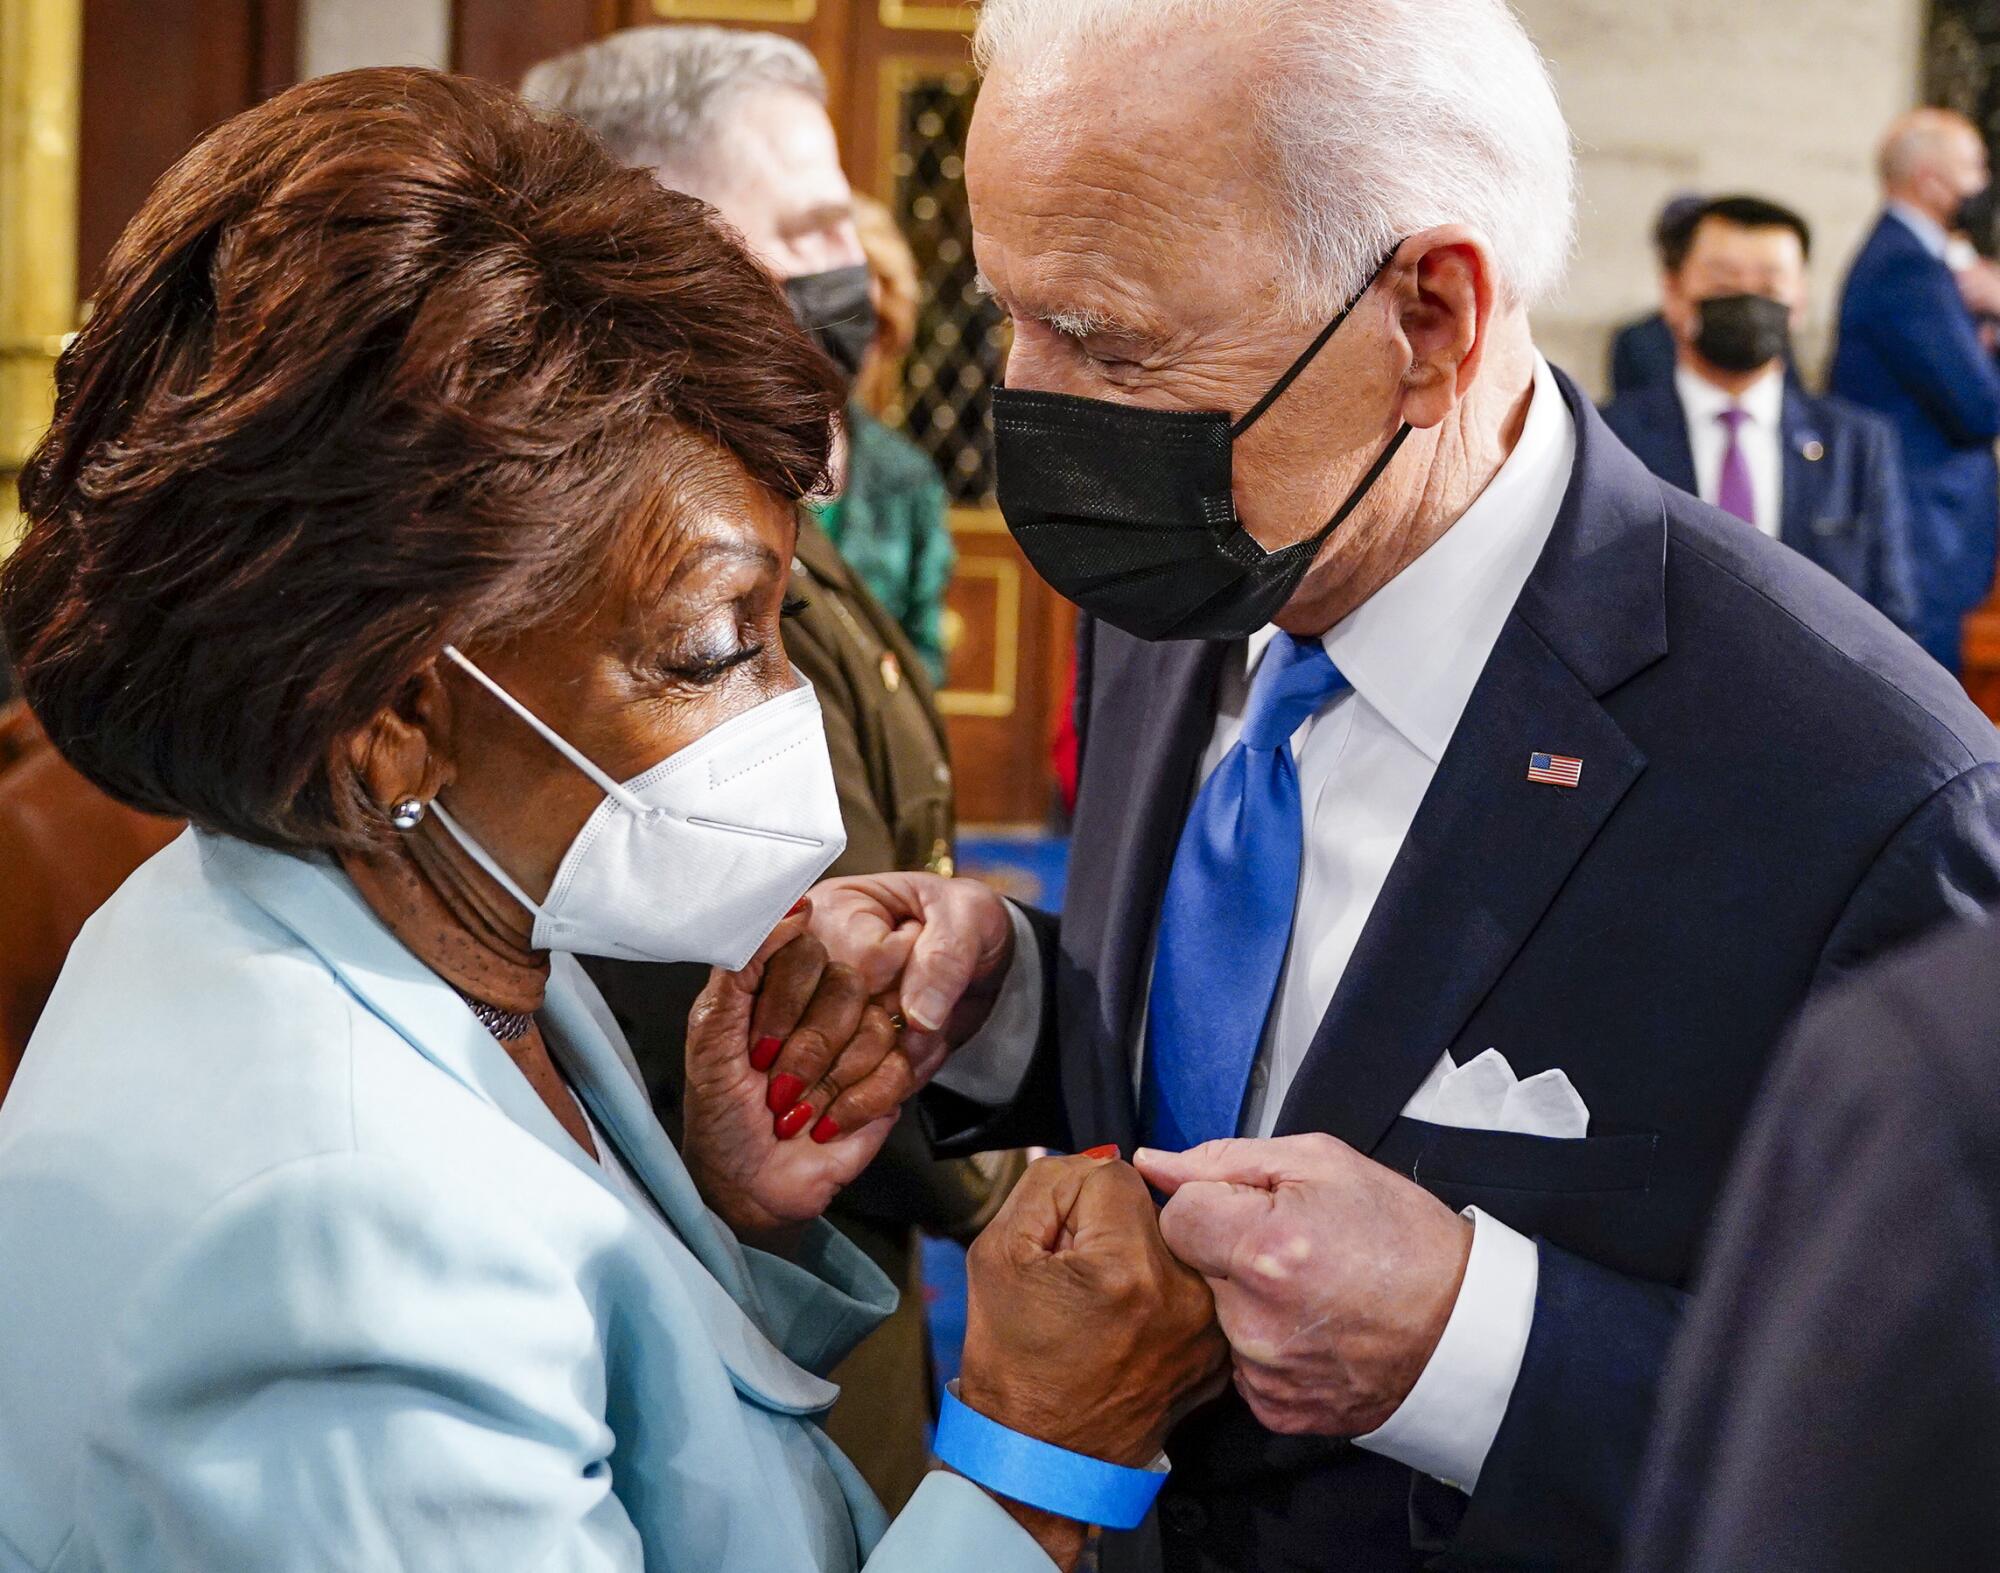 President Joe Biden fist bumps US Representative Maxine Waters (D-Calif.) after he concluded his address.